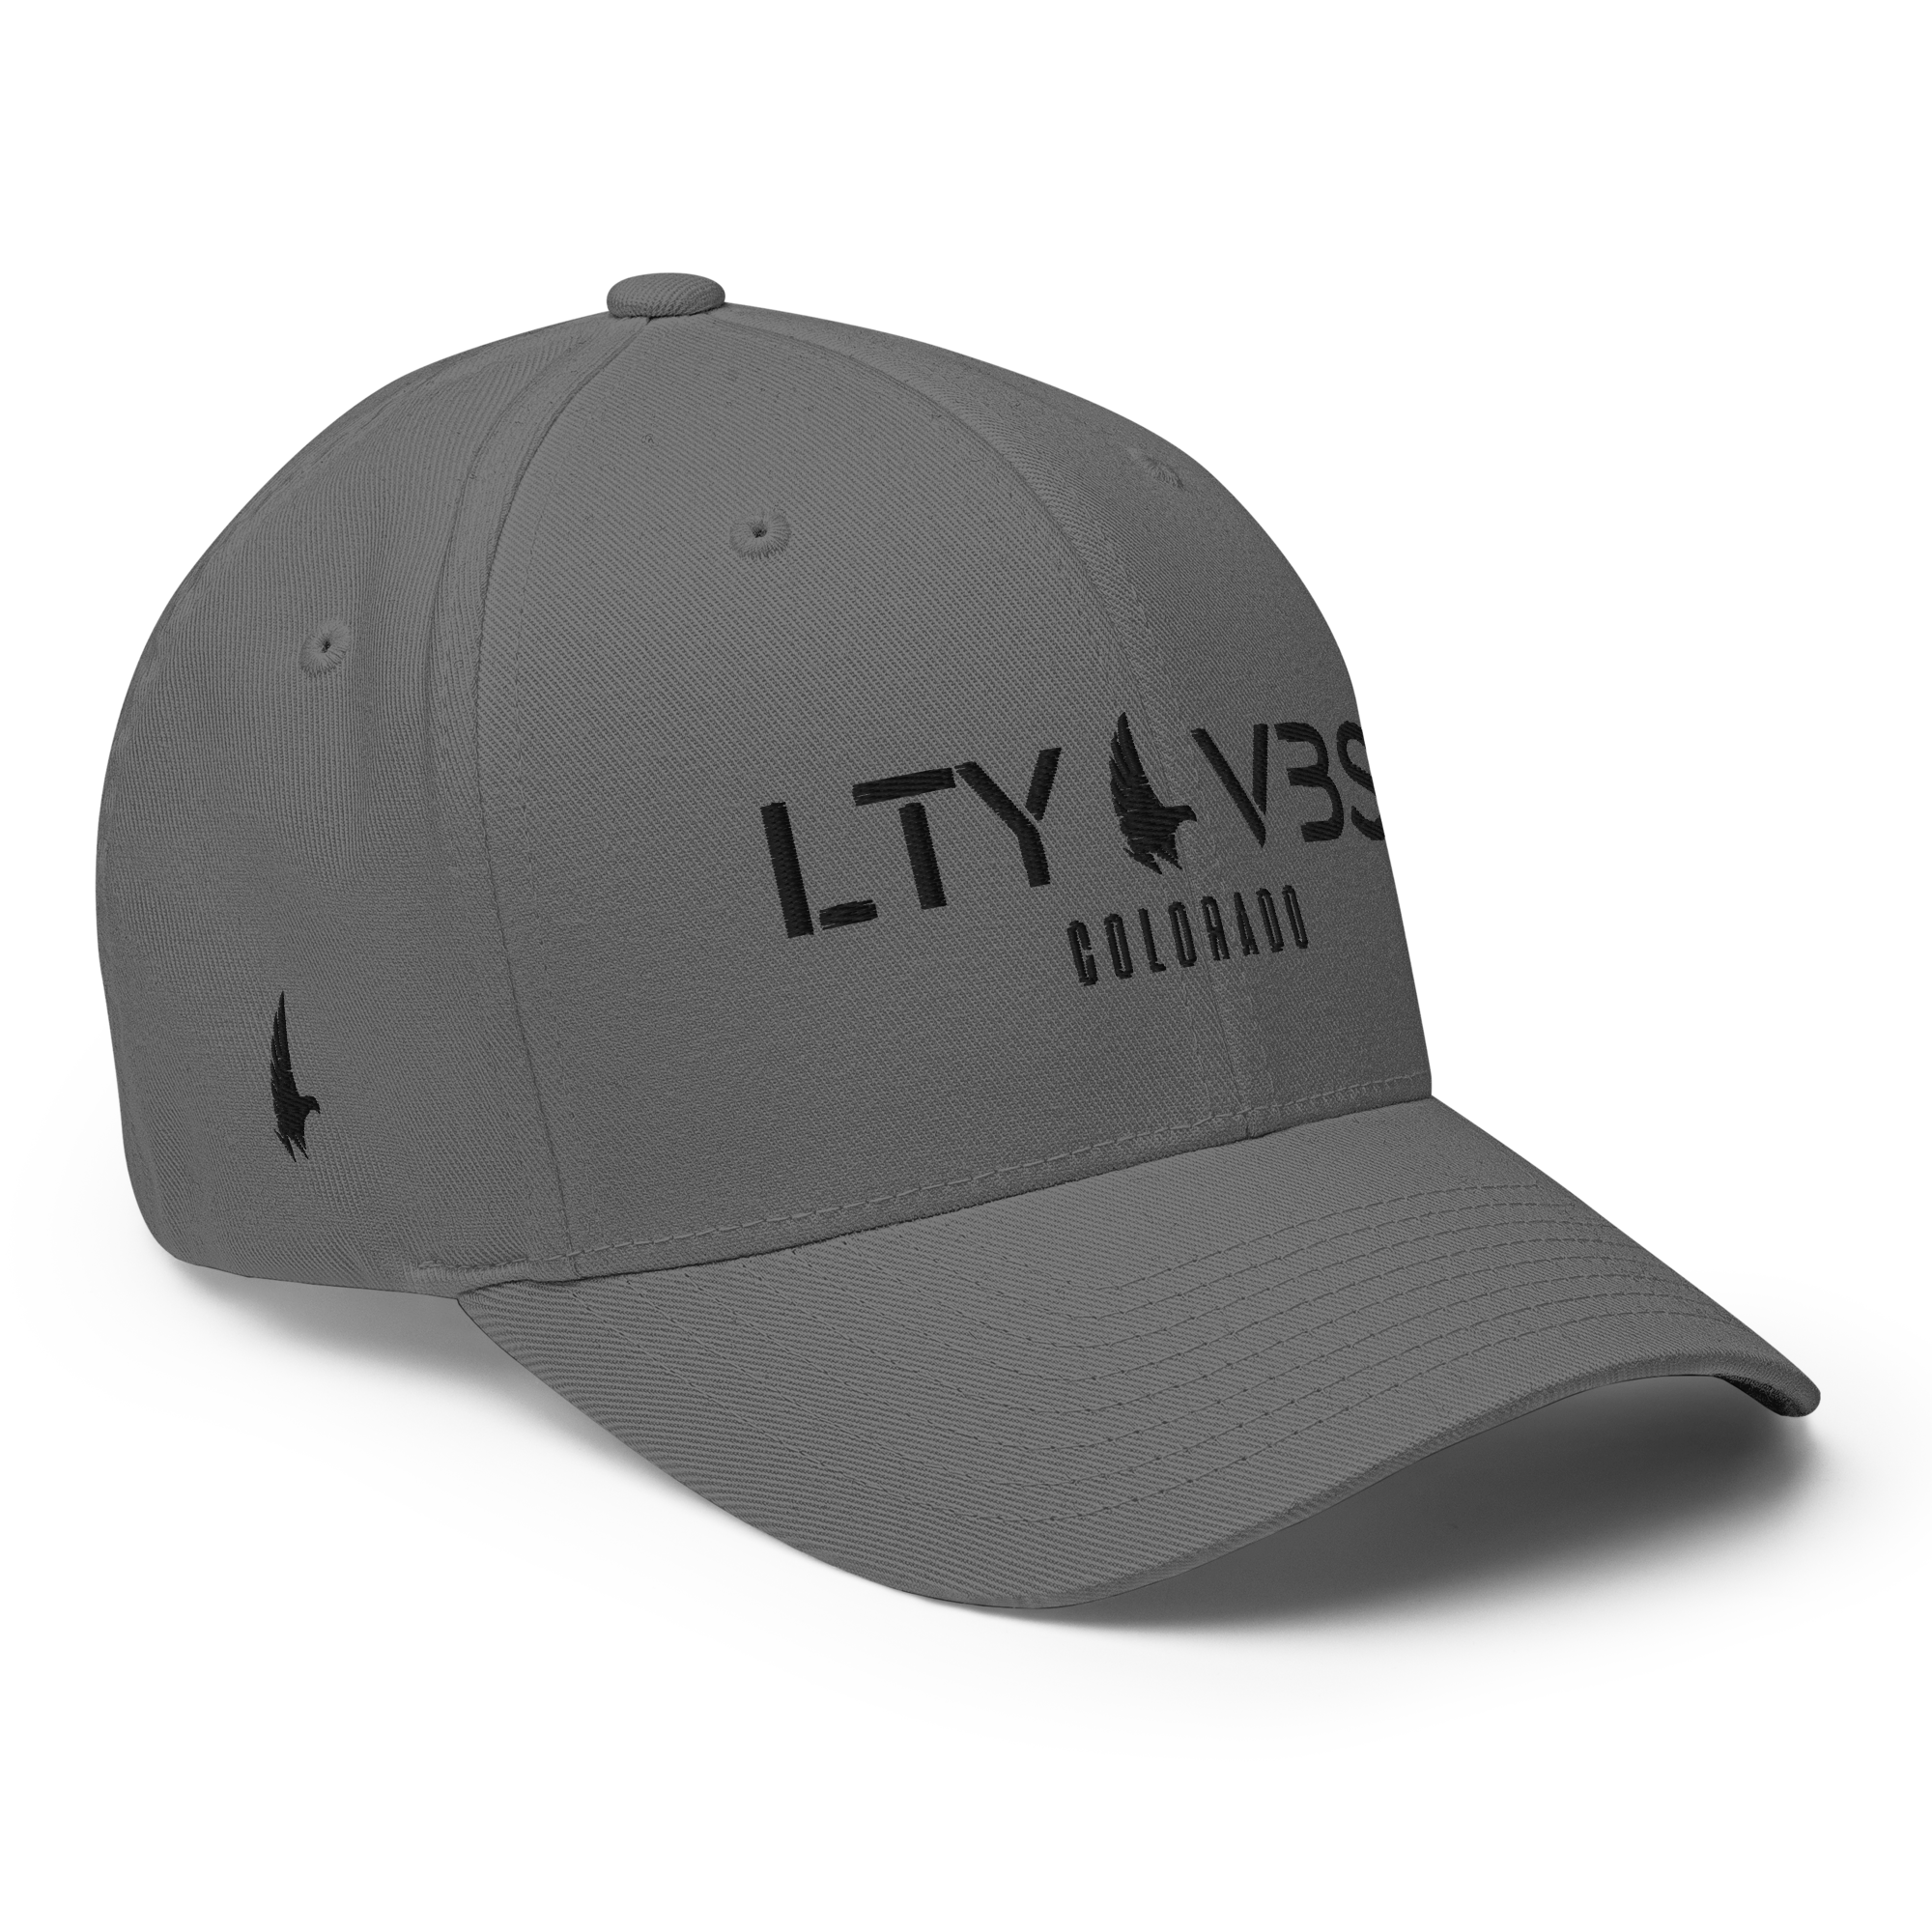 Loyalty Era Colorado Fitted Hat - Gray / Black Fitted - Loyalty Vibes